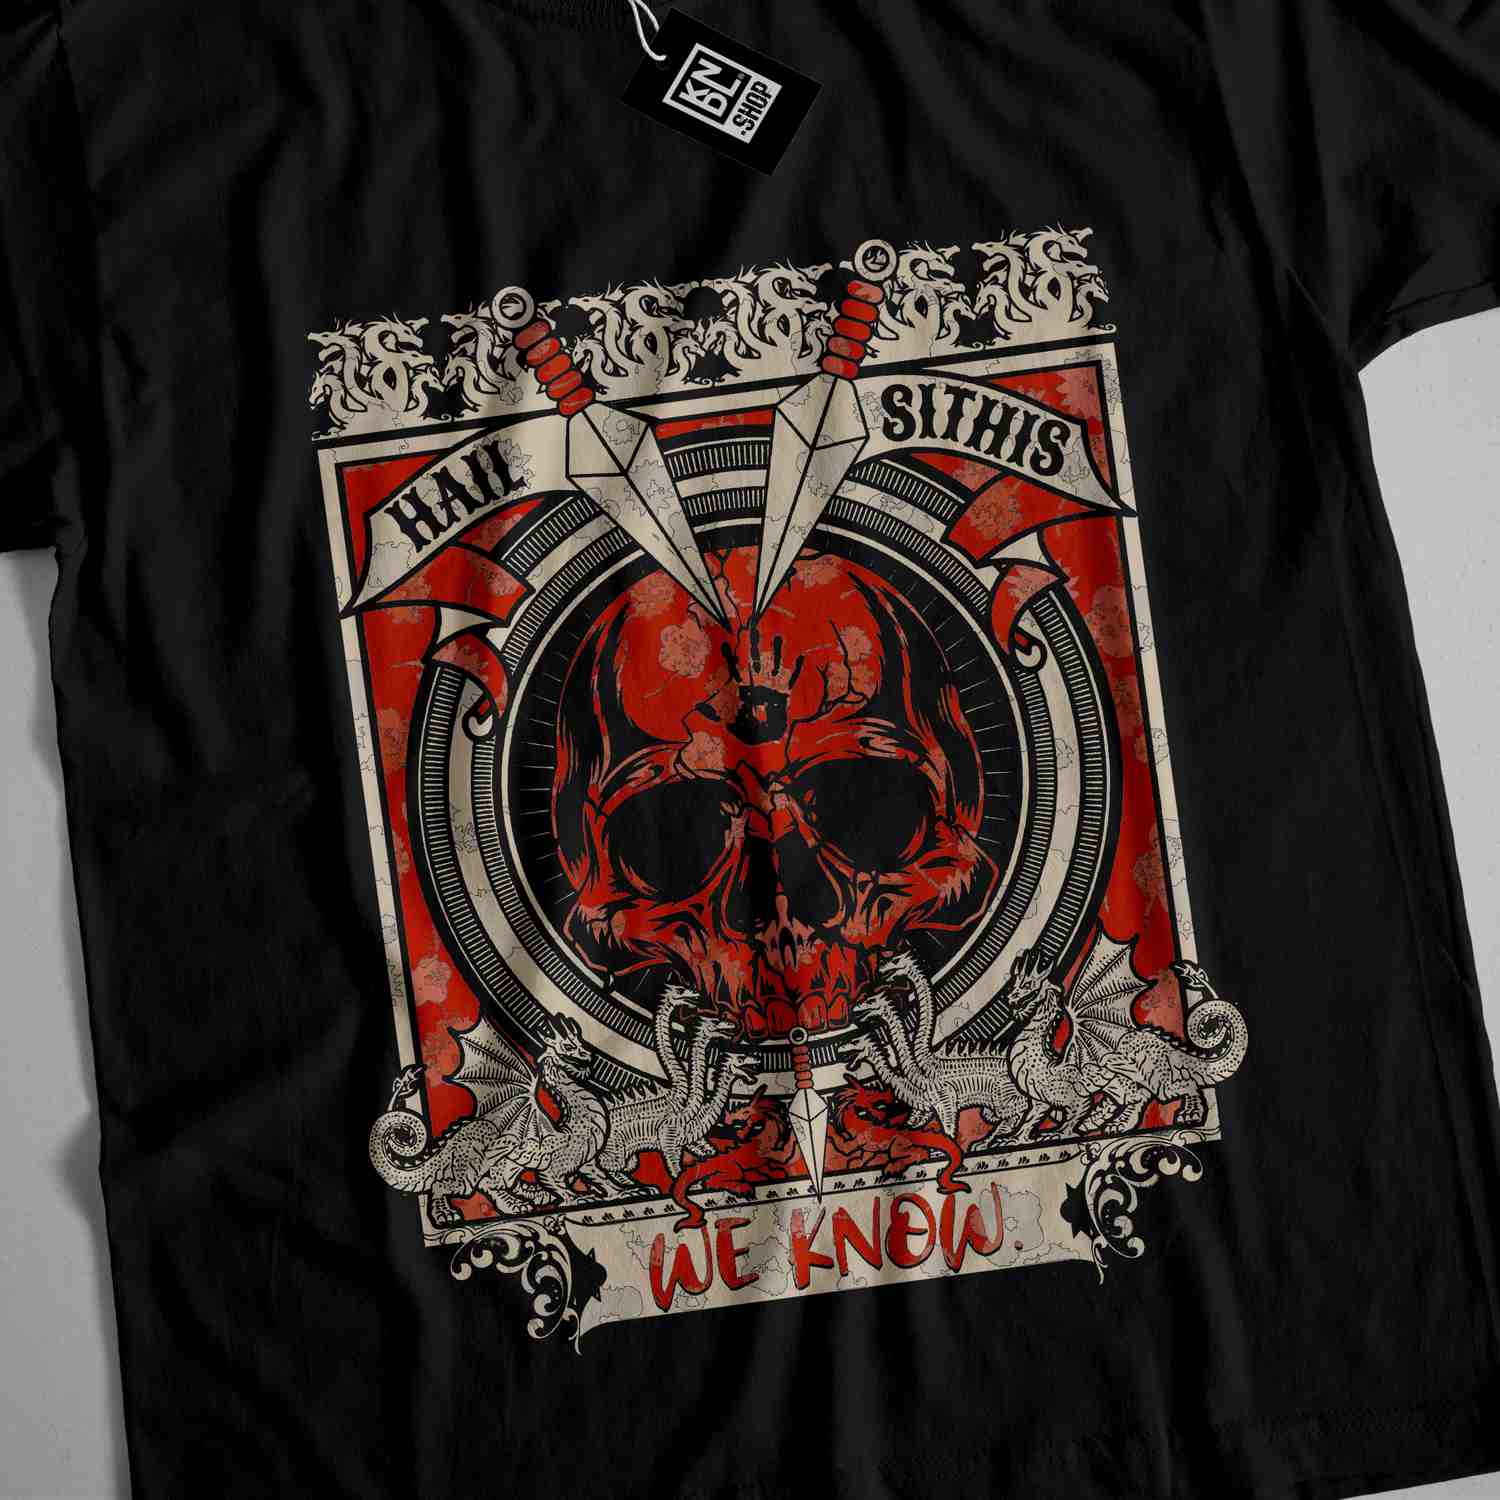 a black shirt with a red skull on it